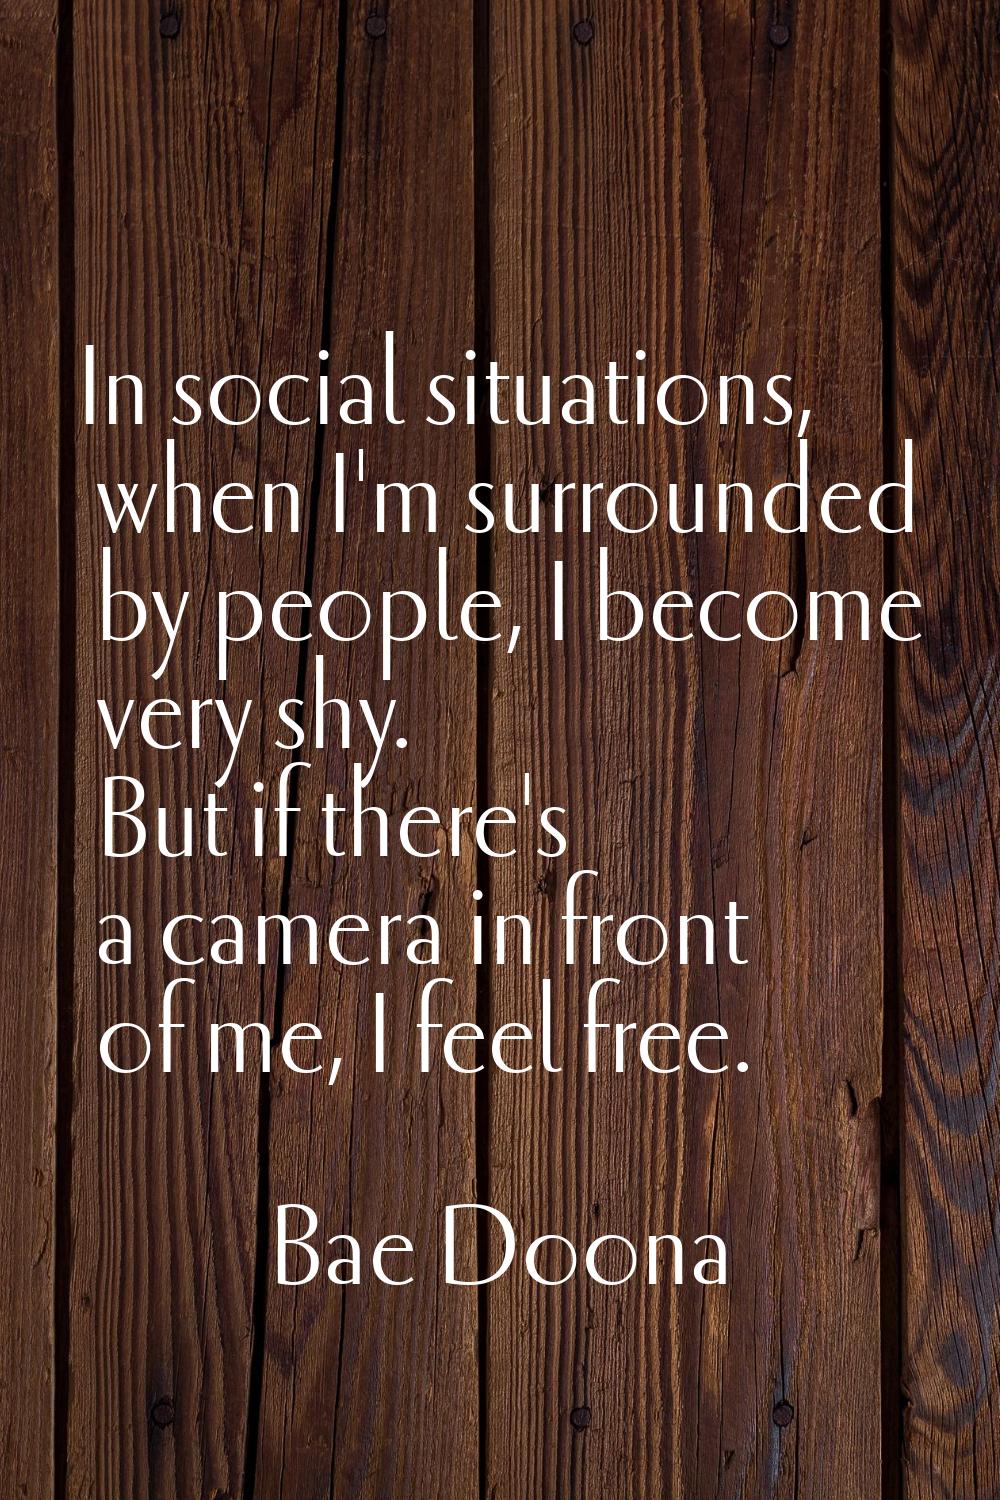 In social situations, when I'm surrounded by people, I become very shy. But if there's a camera in 